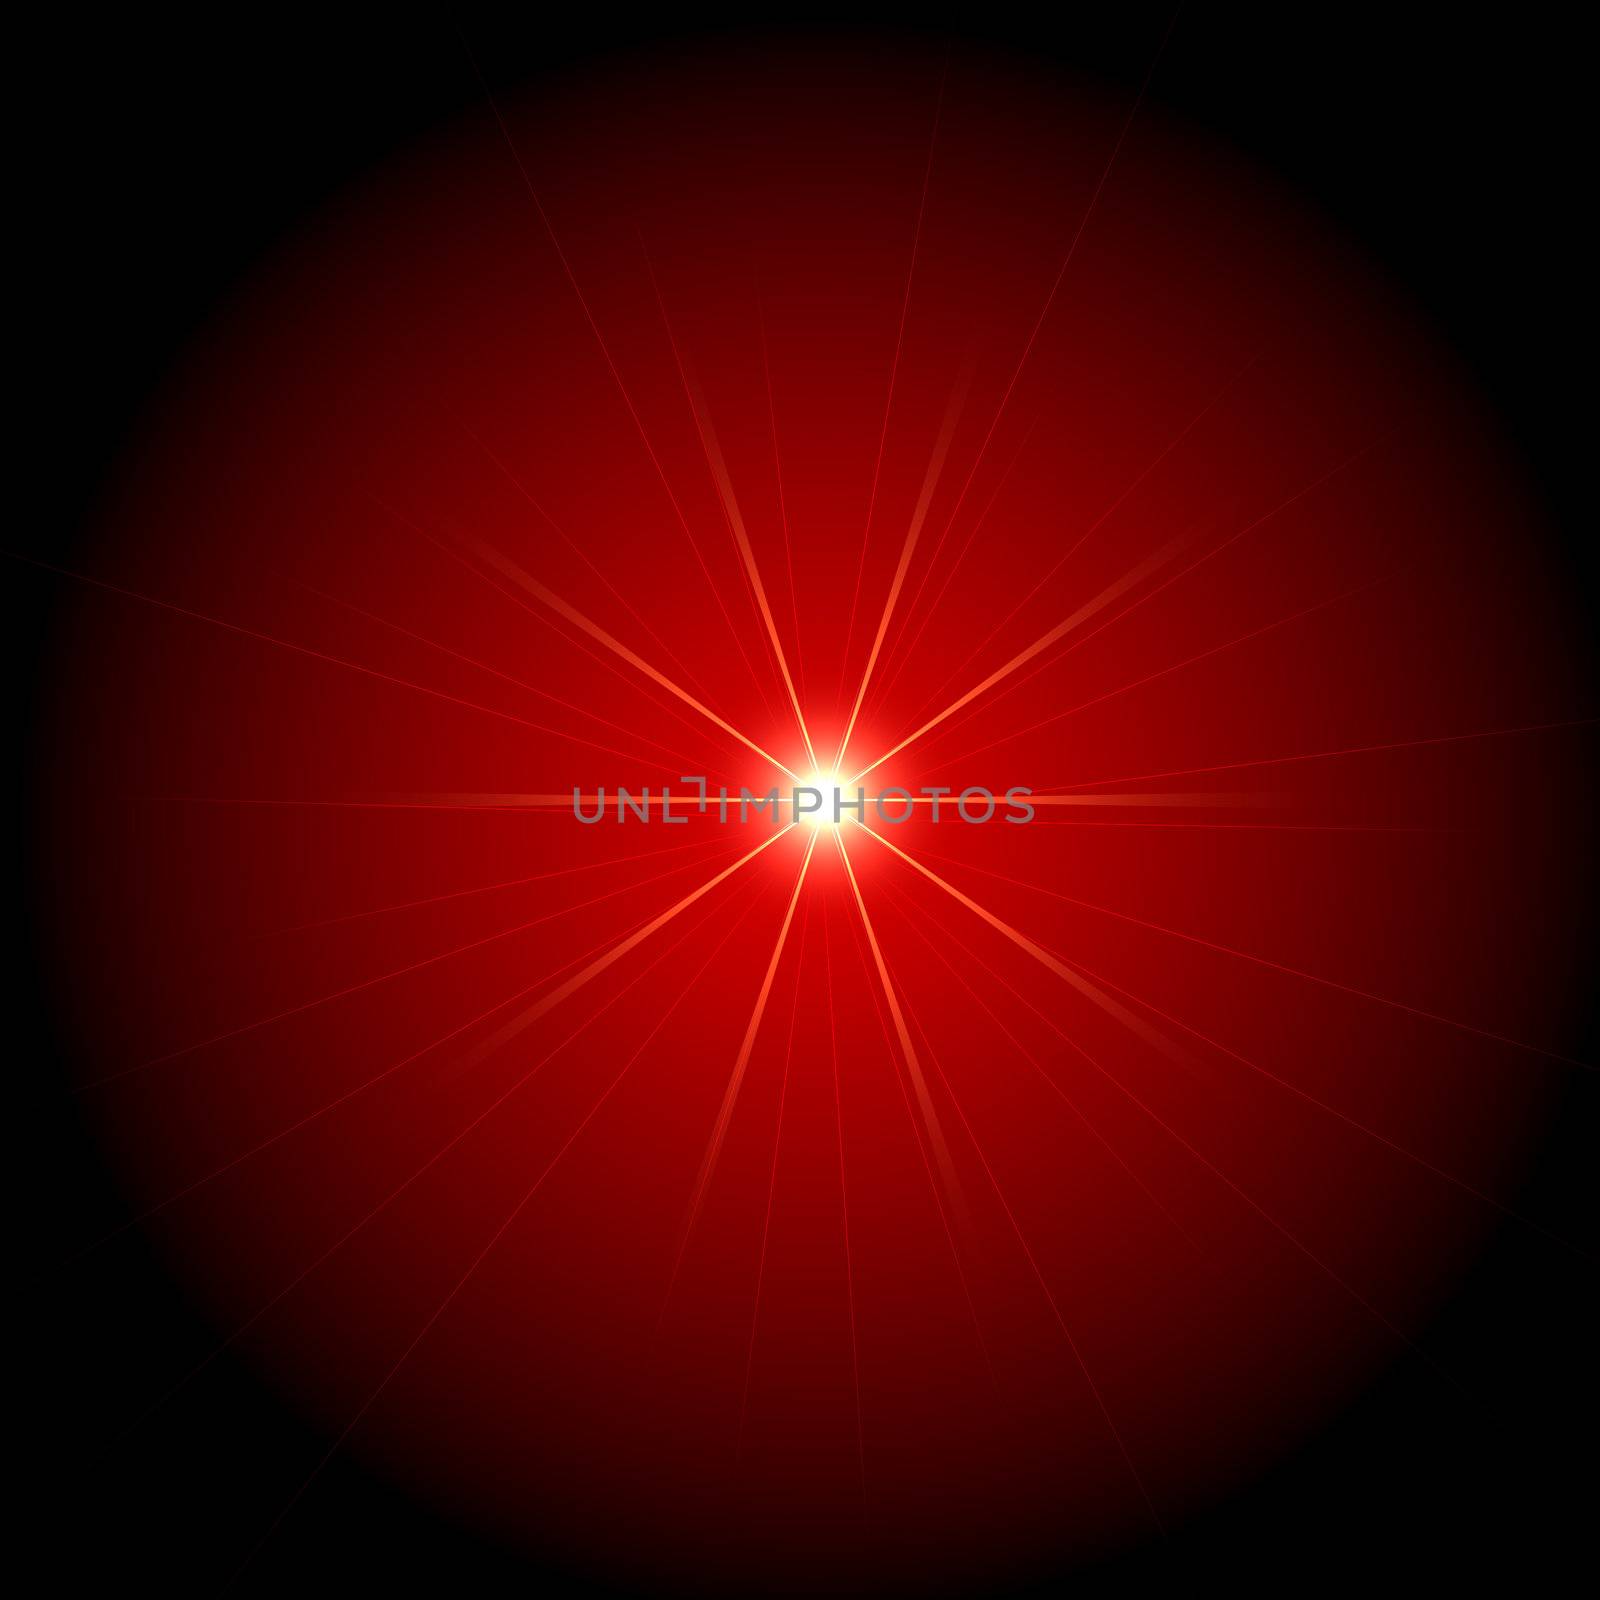 A star shining in a red cloud on a black background